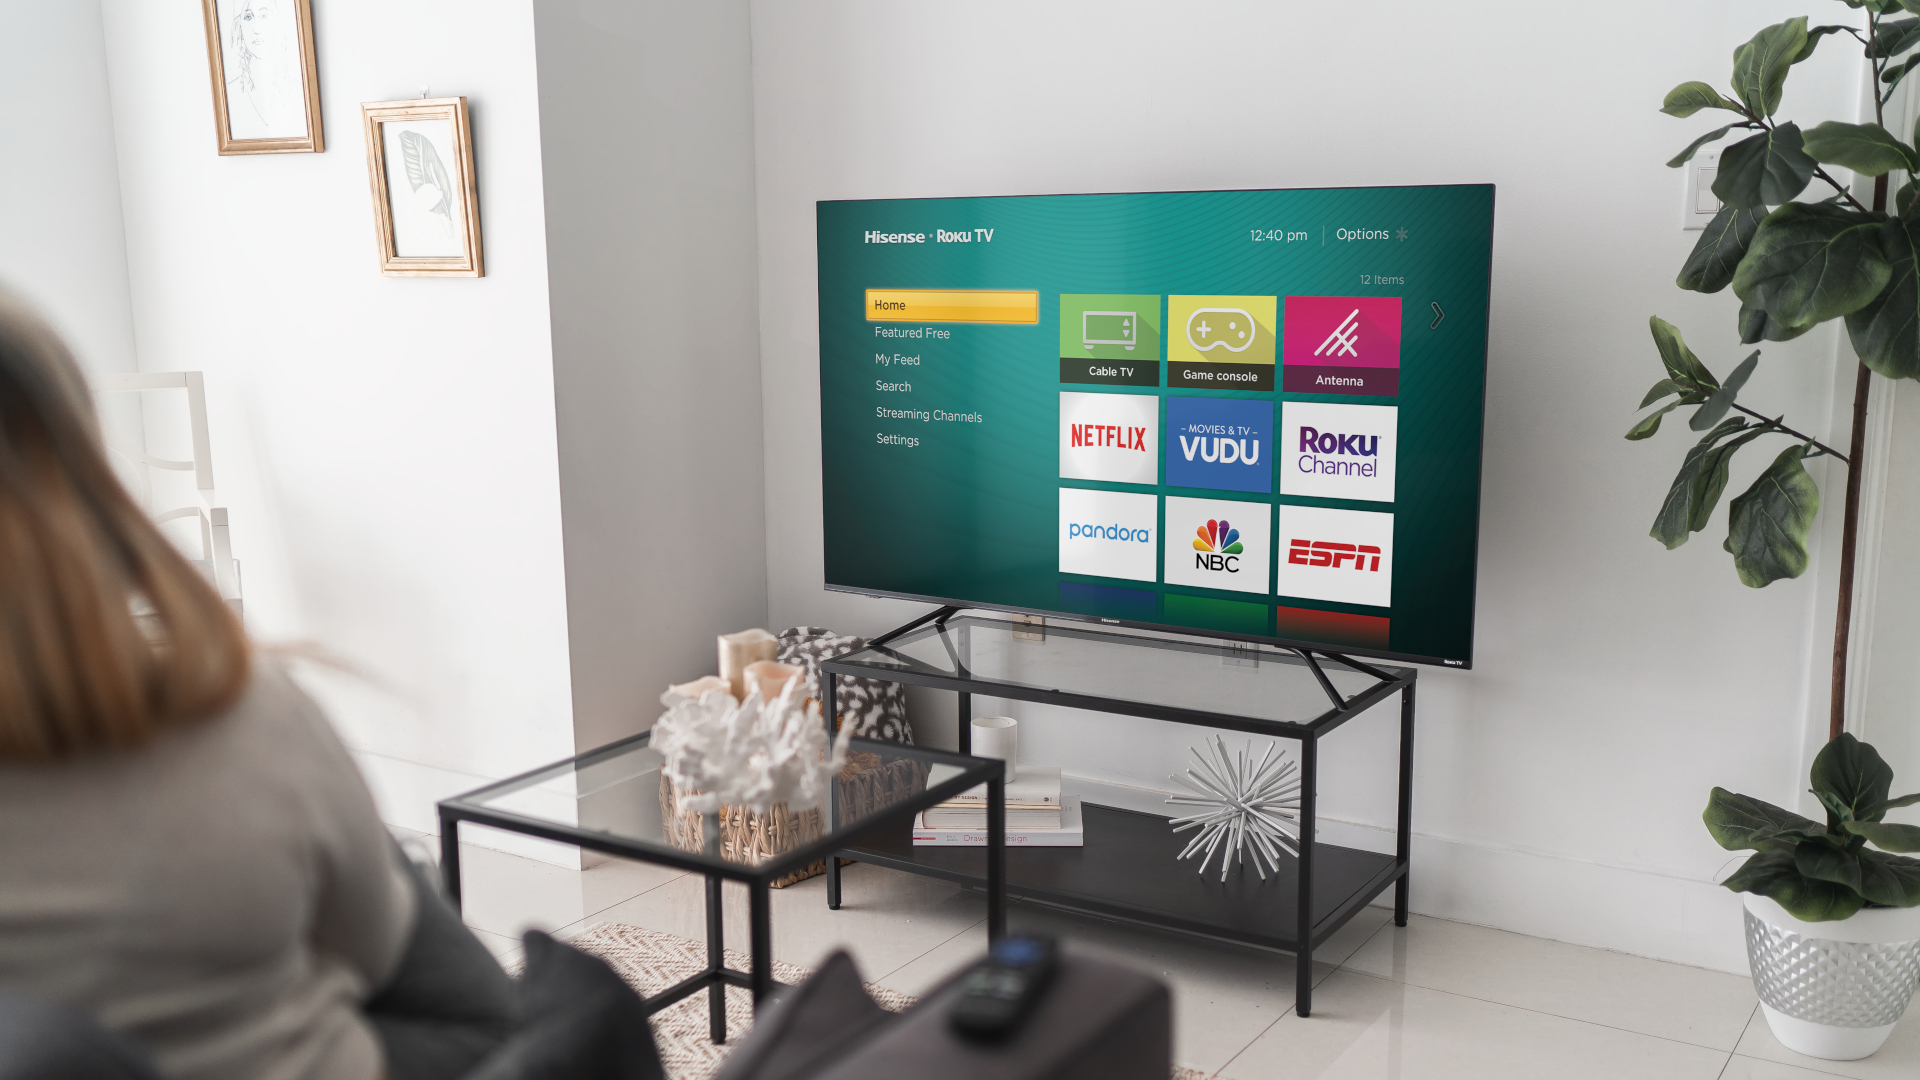 Hisense R8 Roku TV review: Features are nice, appealing price, but no dice  - CNET